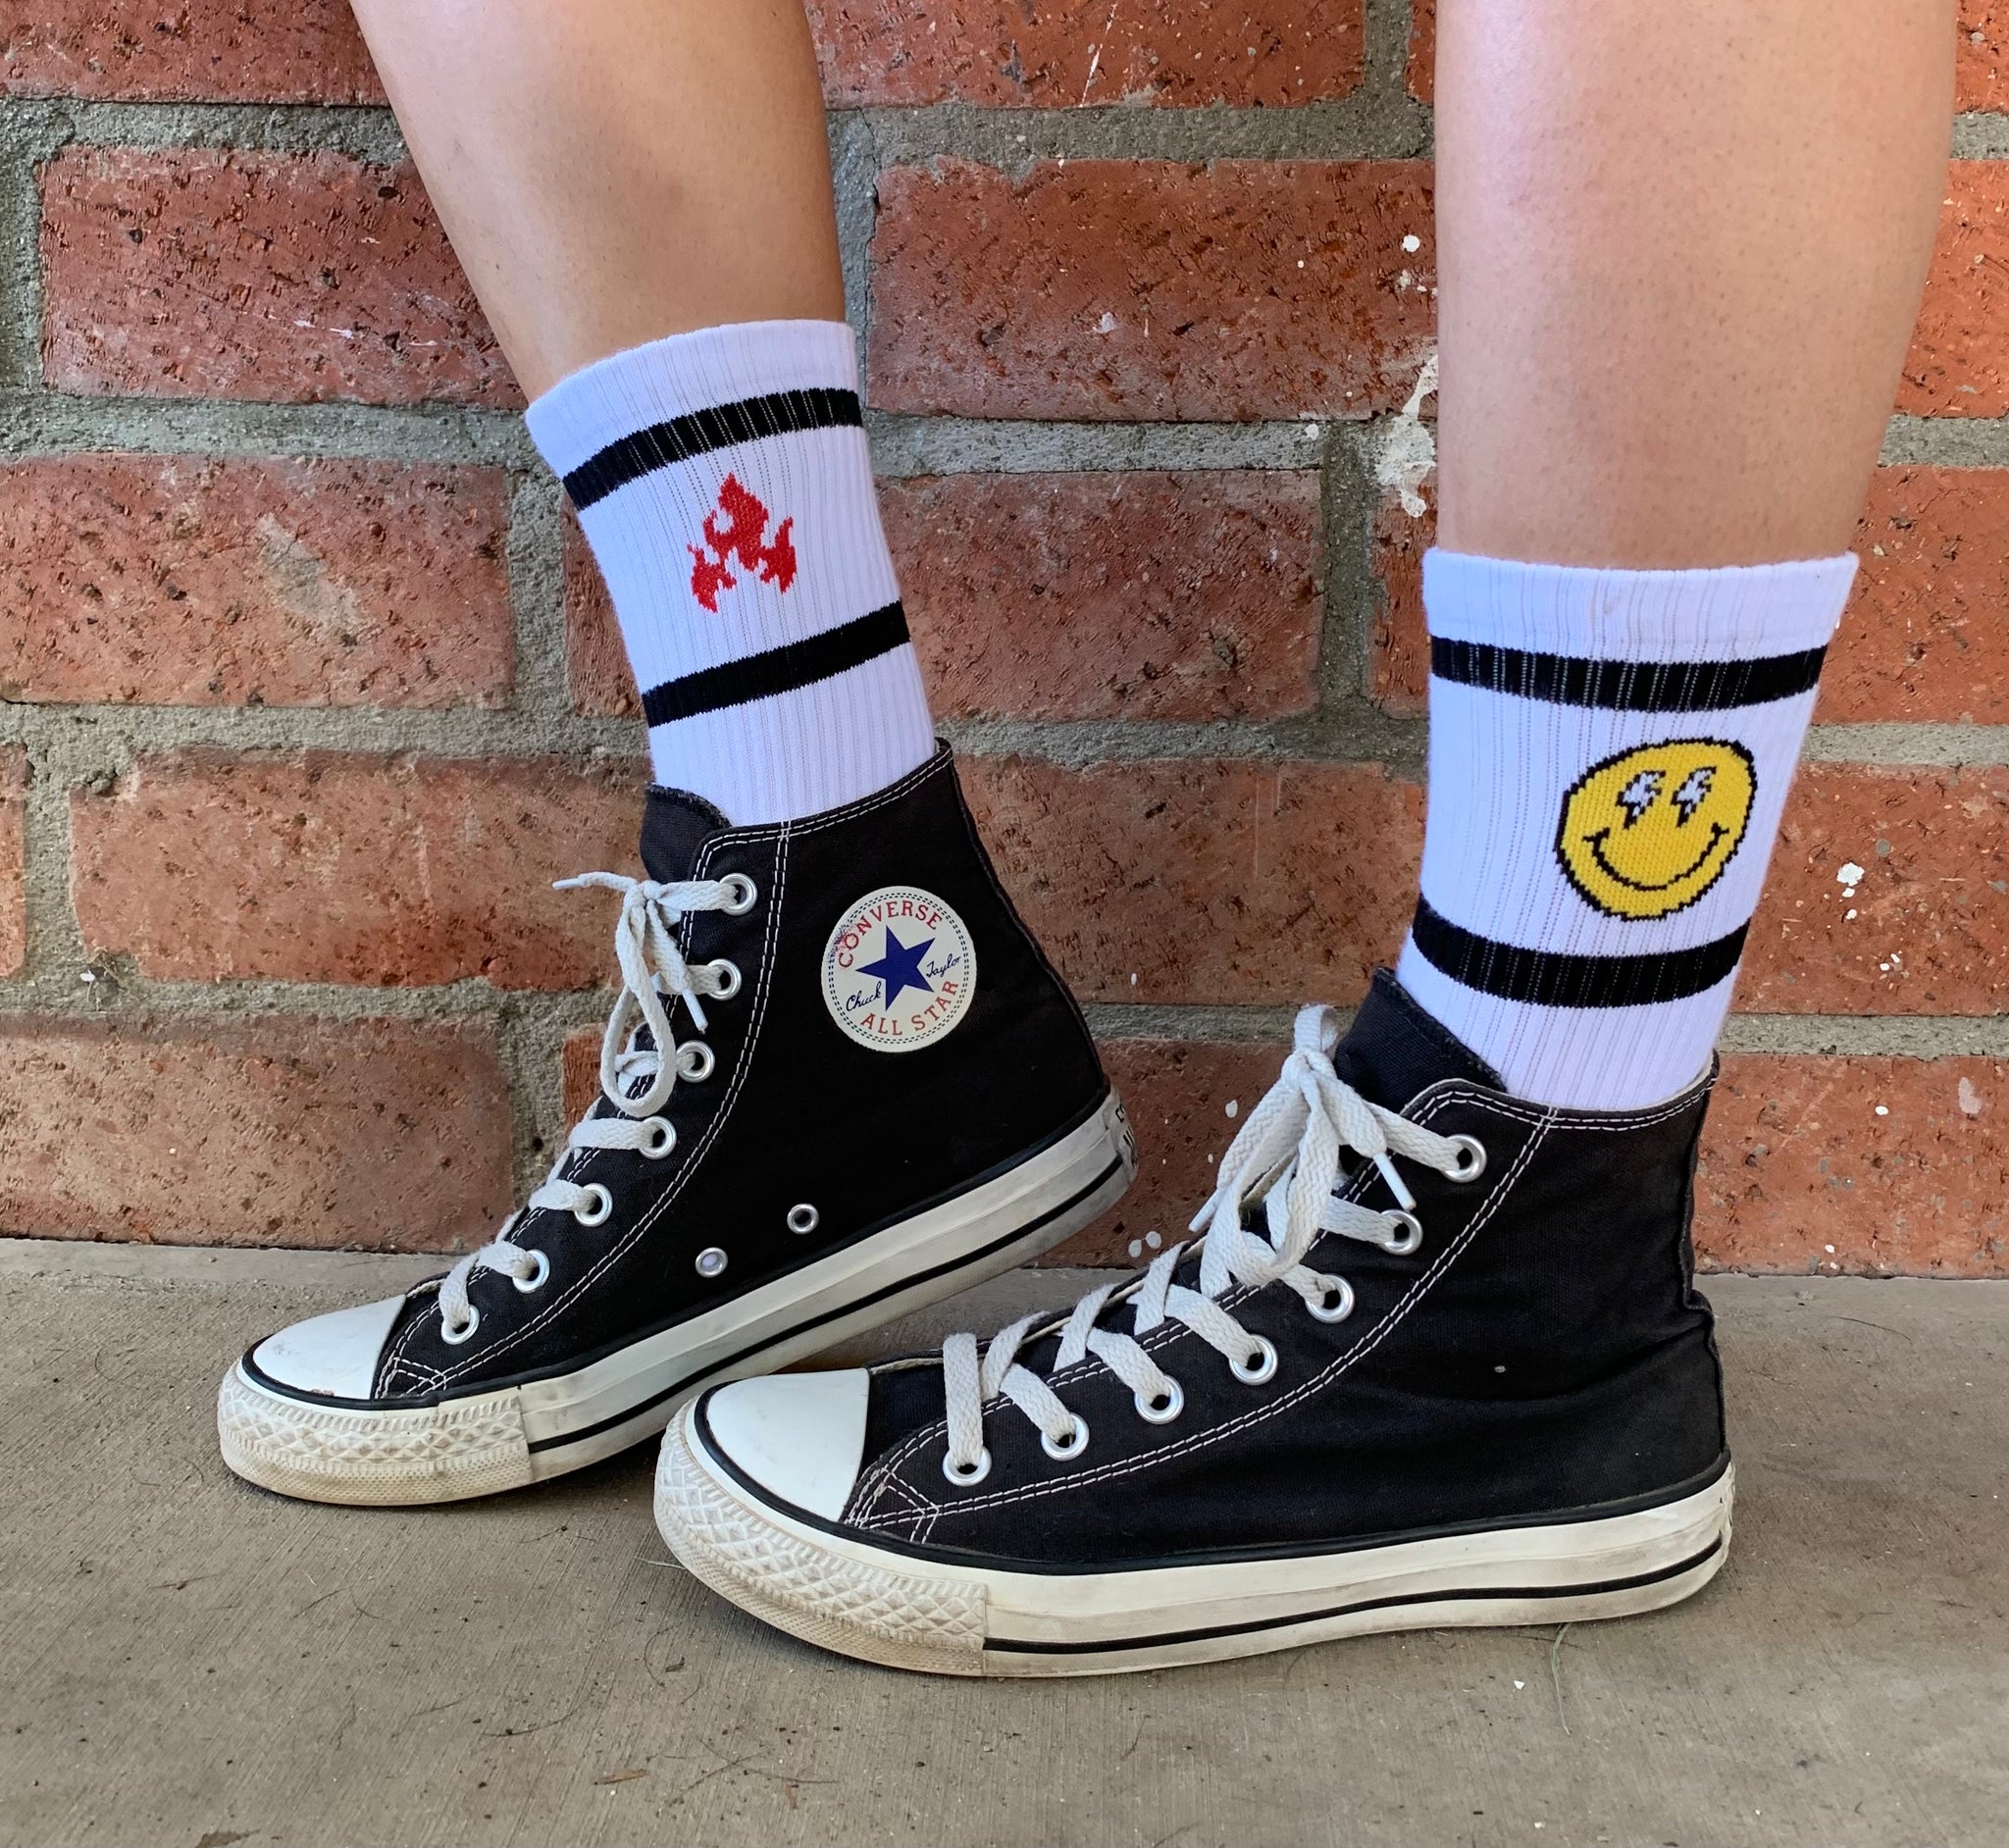 Fearless Socks – Fearlessly Strong & Co.